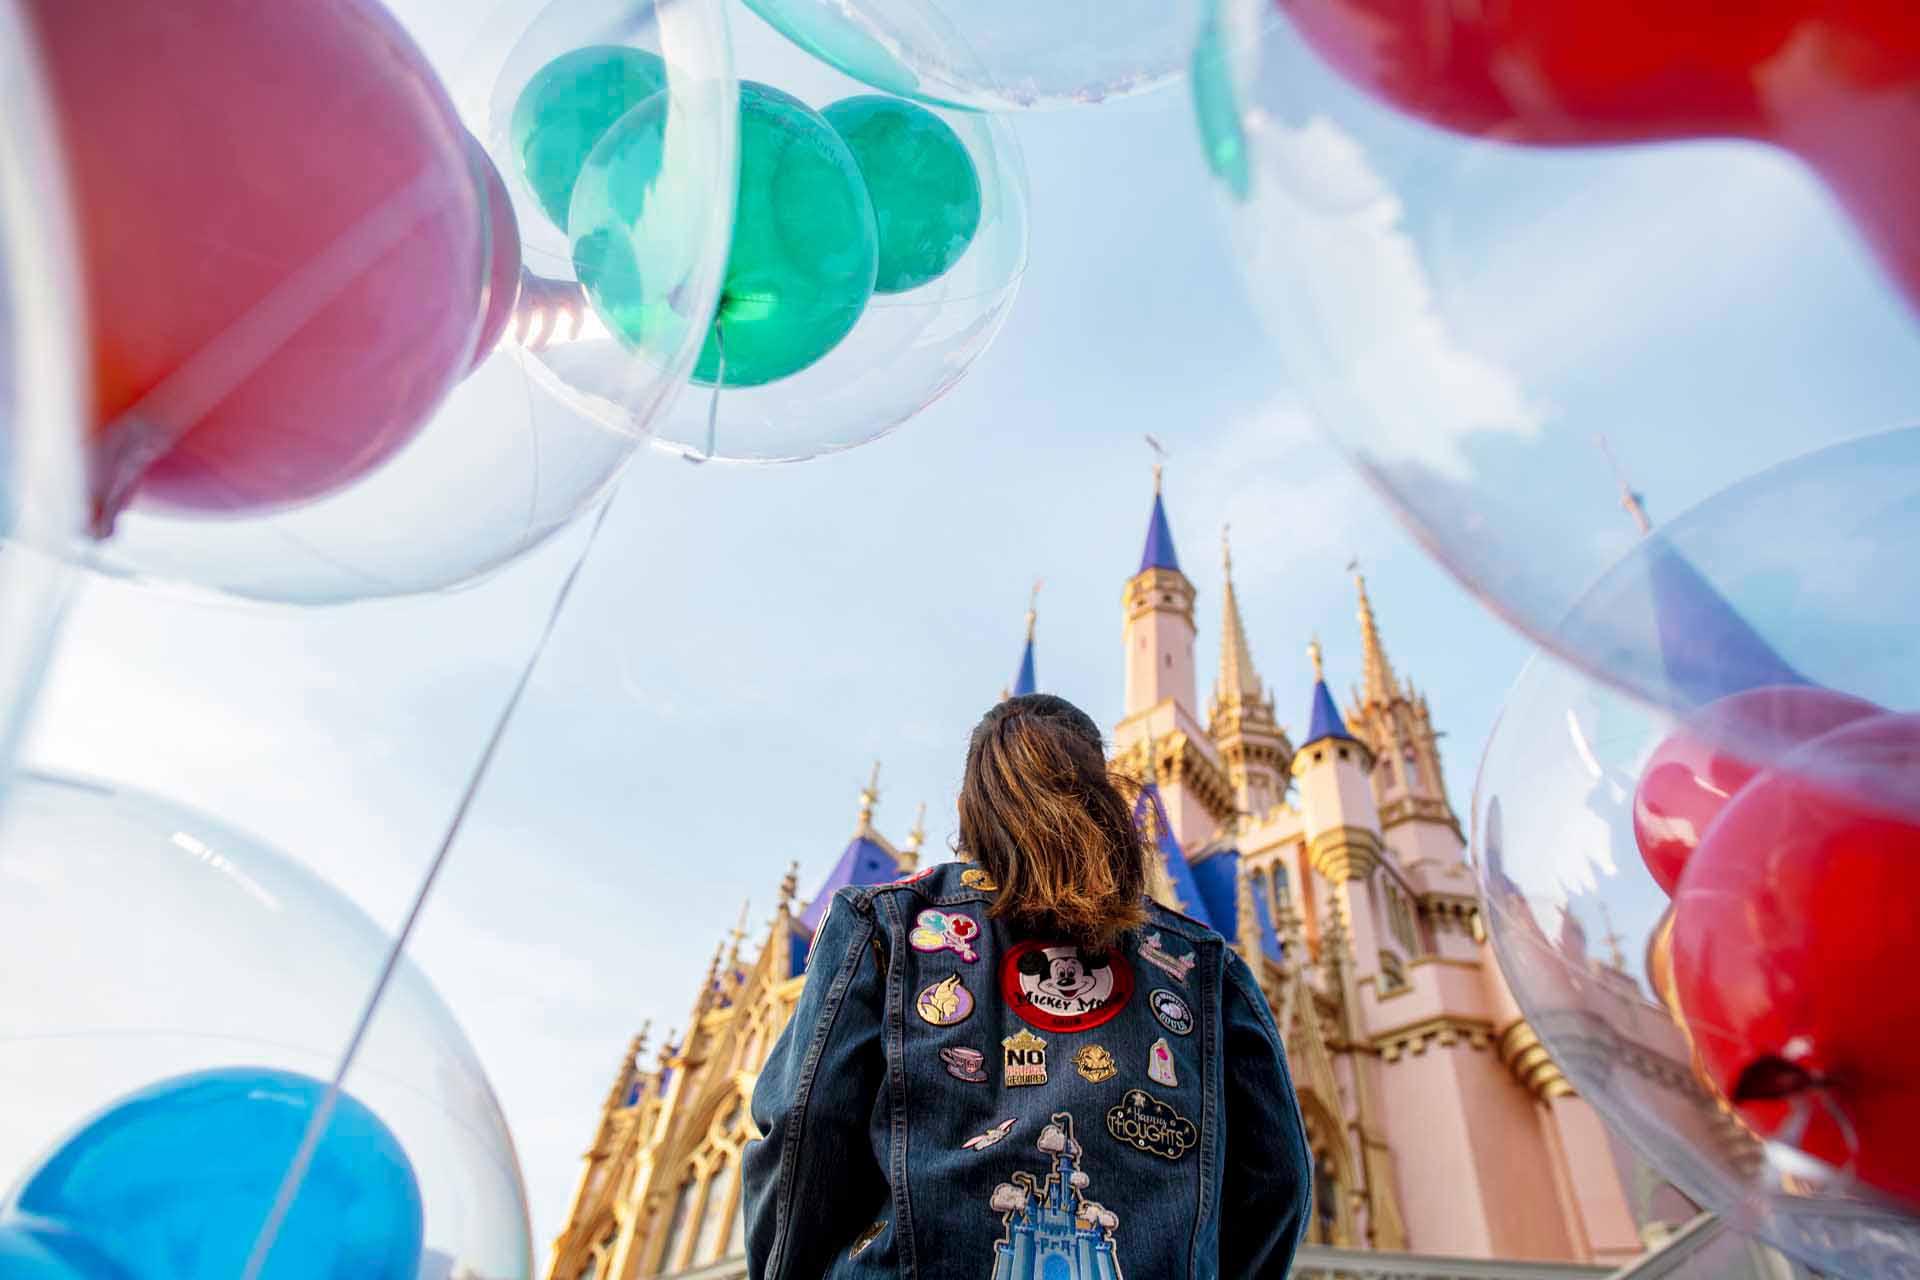 Girl standing in front of Cinderella's Castle at the Magic Kingdom, surrounded by balloons